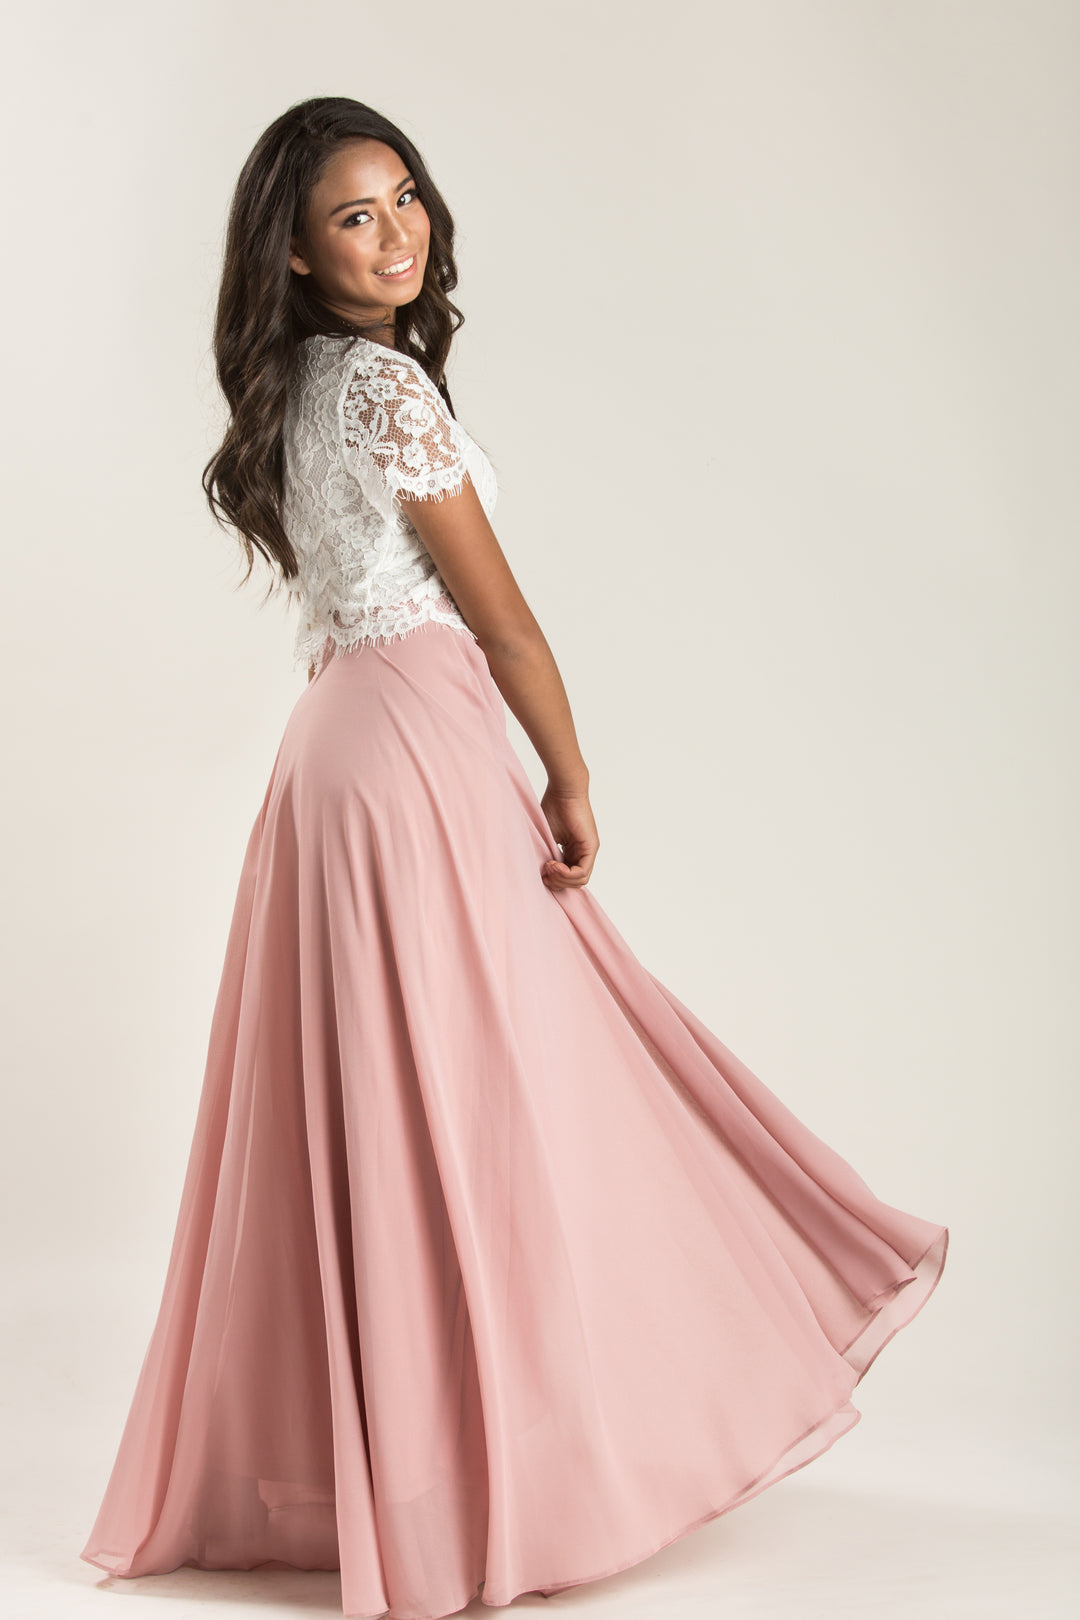 One Skirt, Three Outfits: Styling the Amelia Full Maxi Skirt